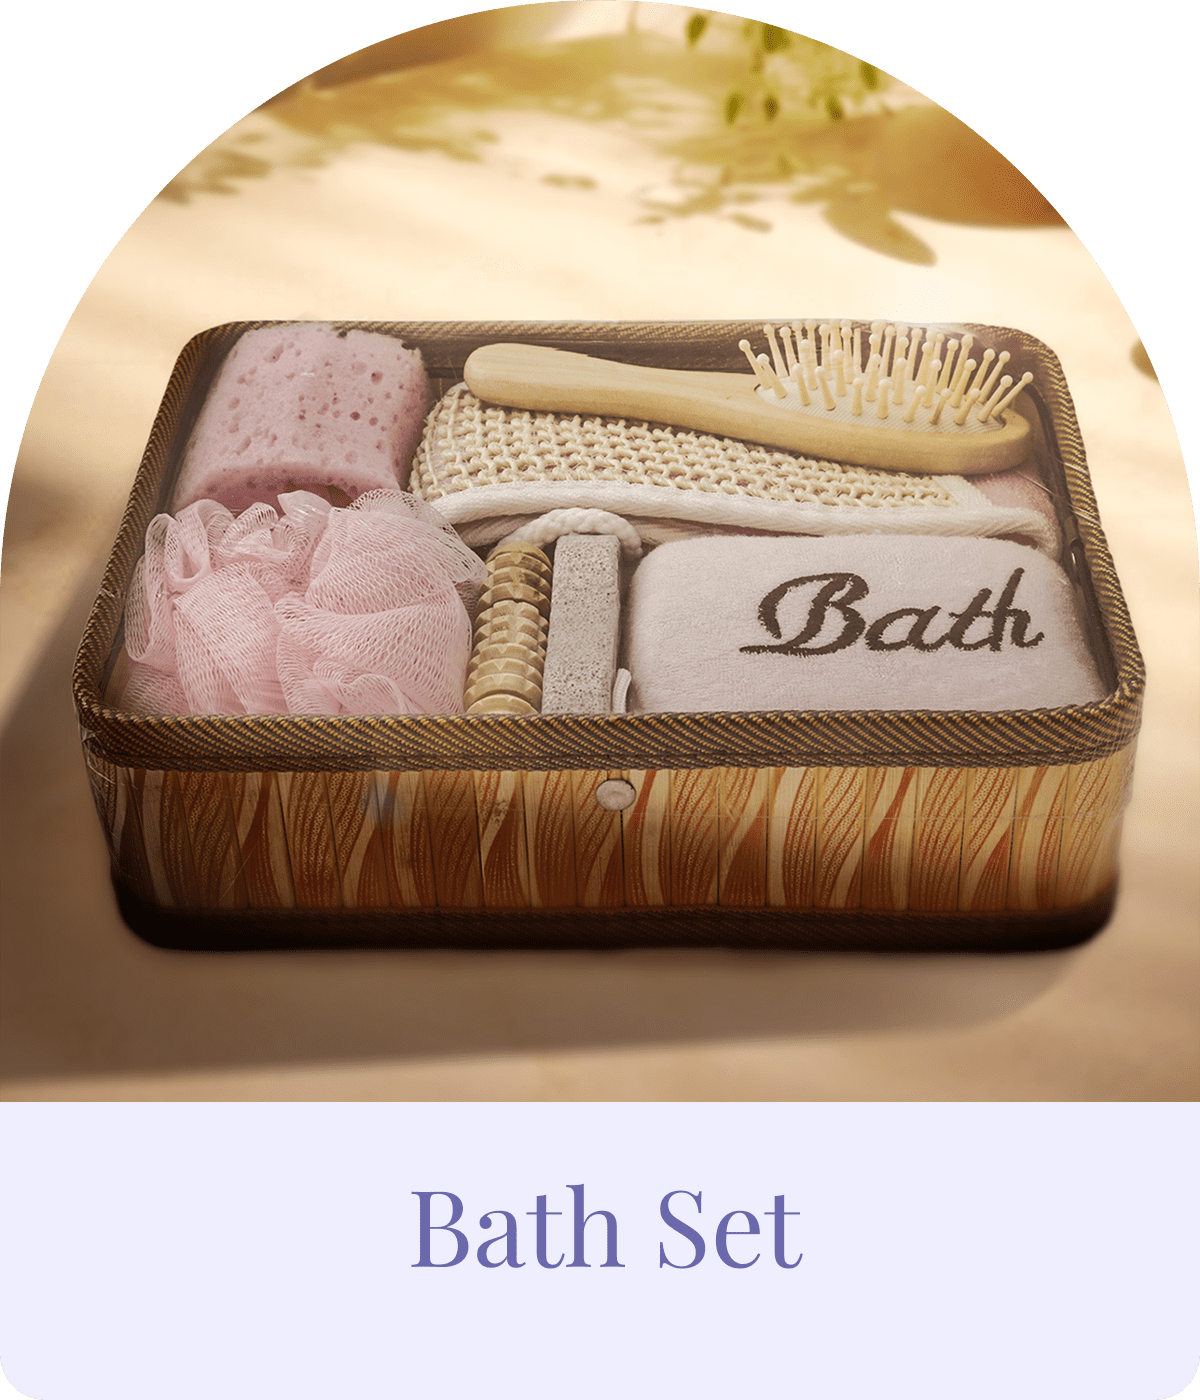 Complete bath set, including towels, soap dispensers, and accessories, to transform your bathroom into a spa-like retreat